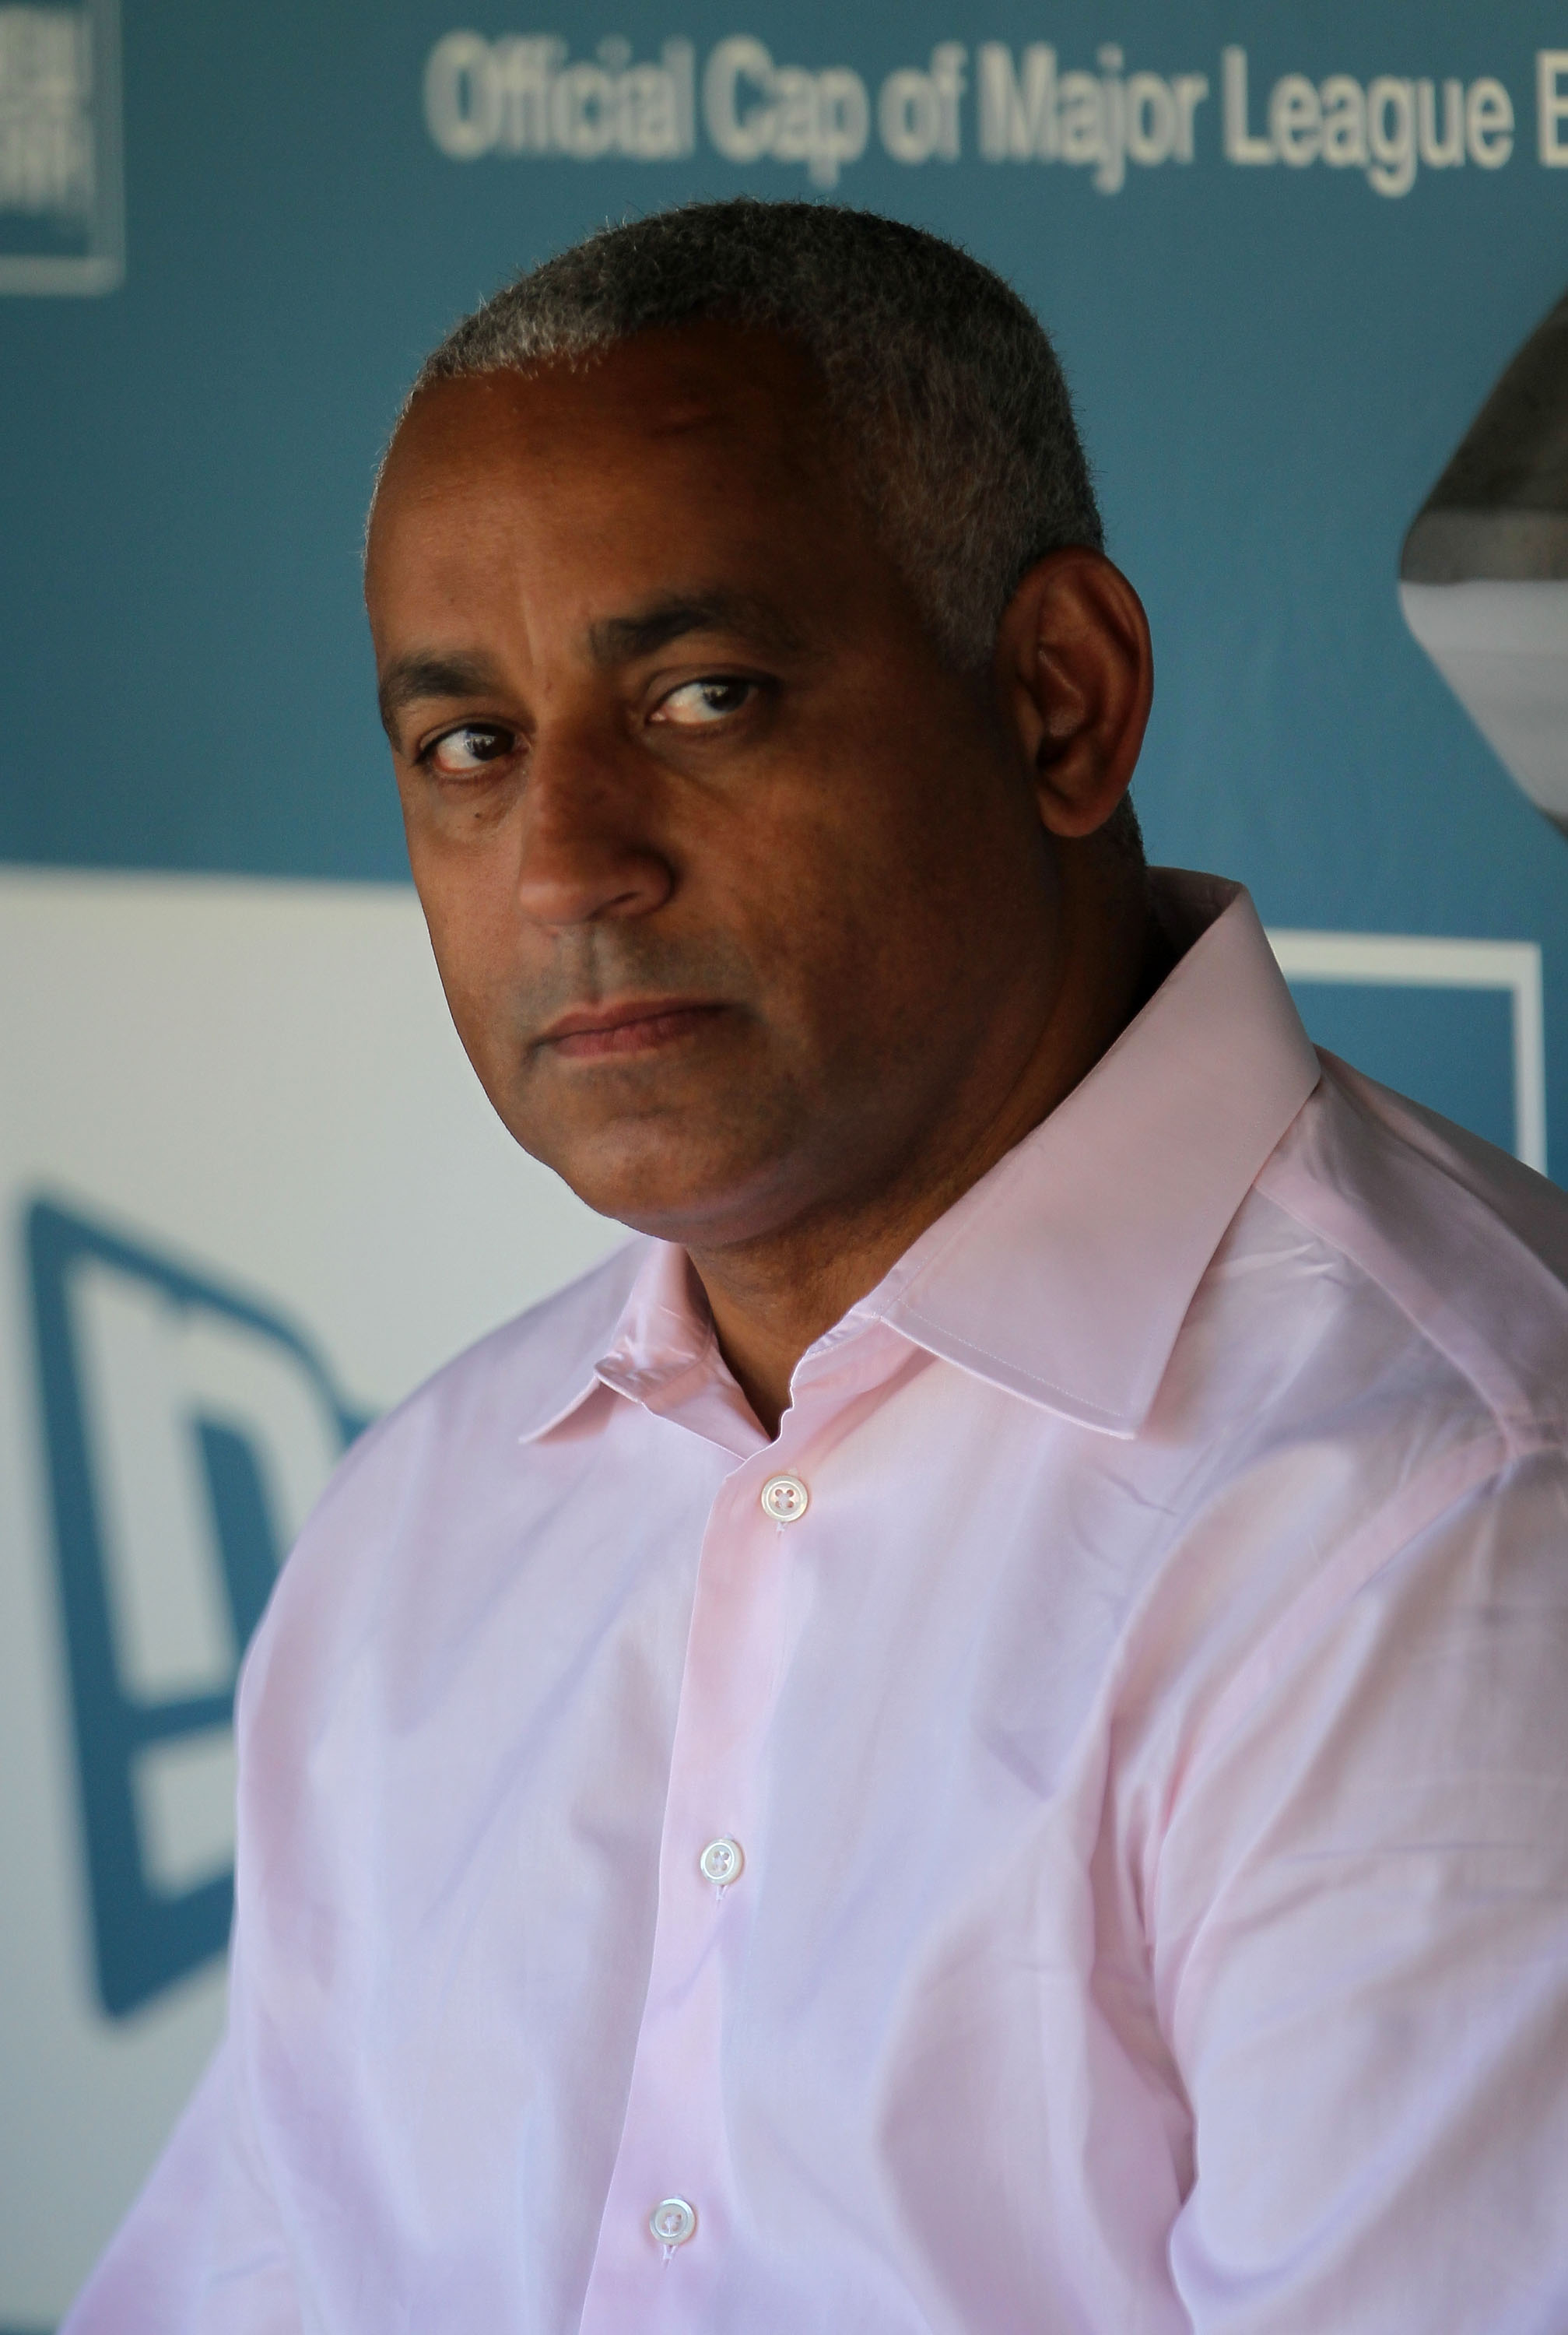 LOS ANGELES, CA - JULY 24:  New York Mets general manager Omar Minaya looks on from the dugout prior to the start of the game against the Los Angeles Dodgers at Dodger Stadium on July 24, 2010 in Los Angeles, California.  (Photo by Jeff Gross/Getty Images